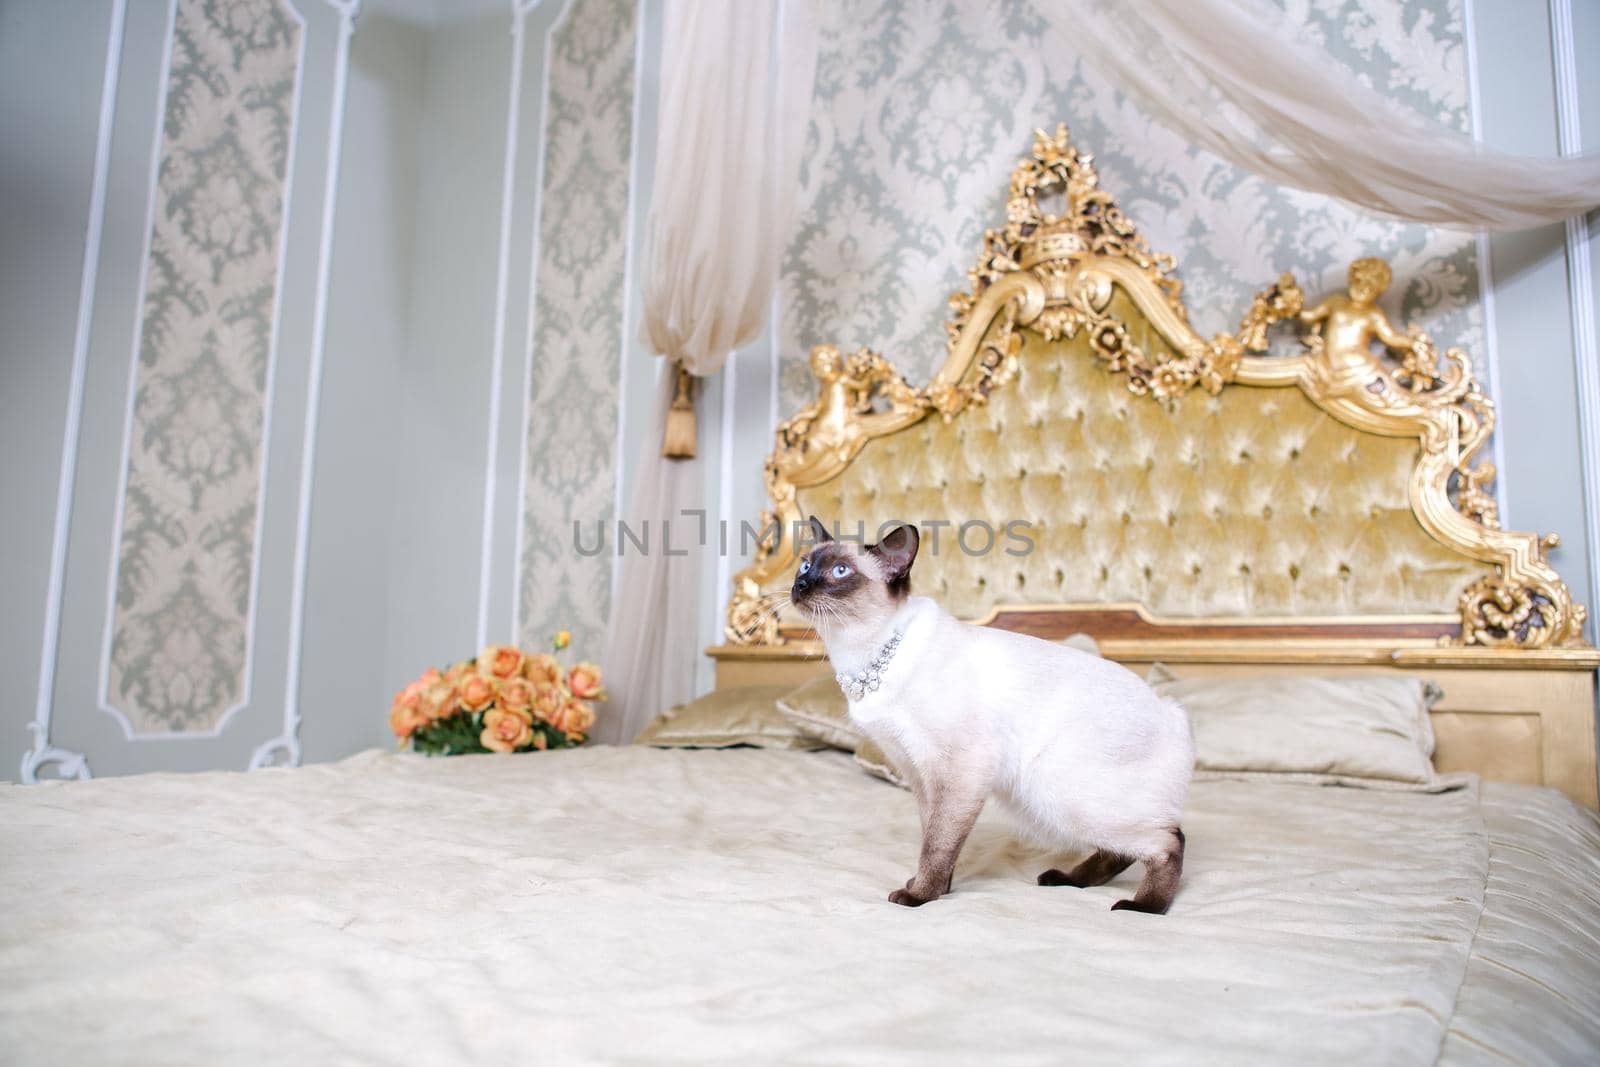 The theme of luxury and wealth. Young cat without a tail purebred bobtail Mecogon is on the big bed headboard near the Renaissance Baroque pillow in France Europe Versailles Palace.